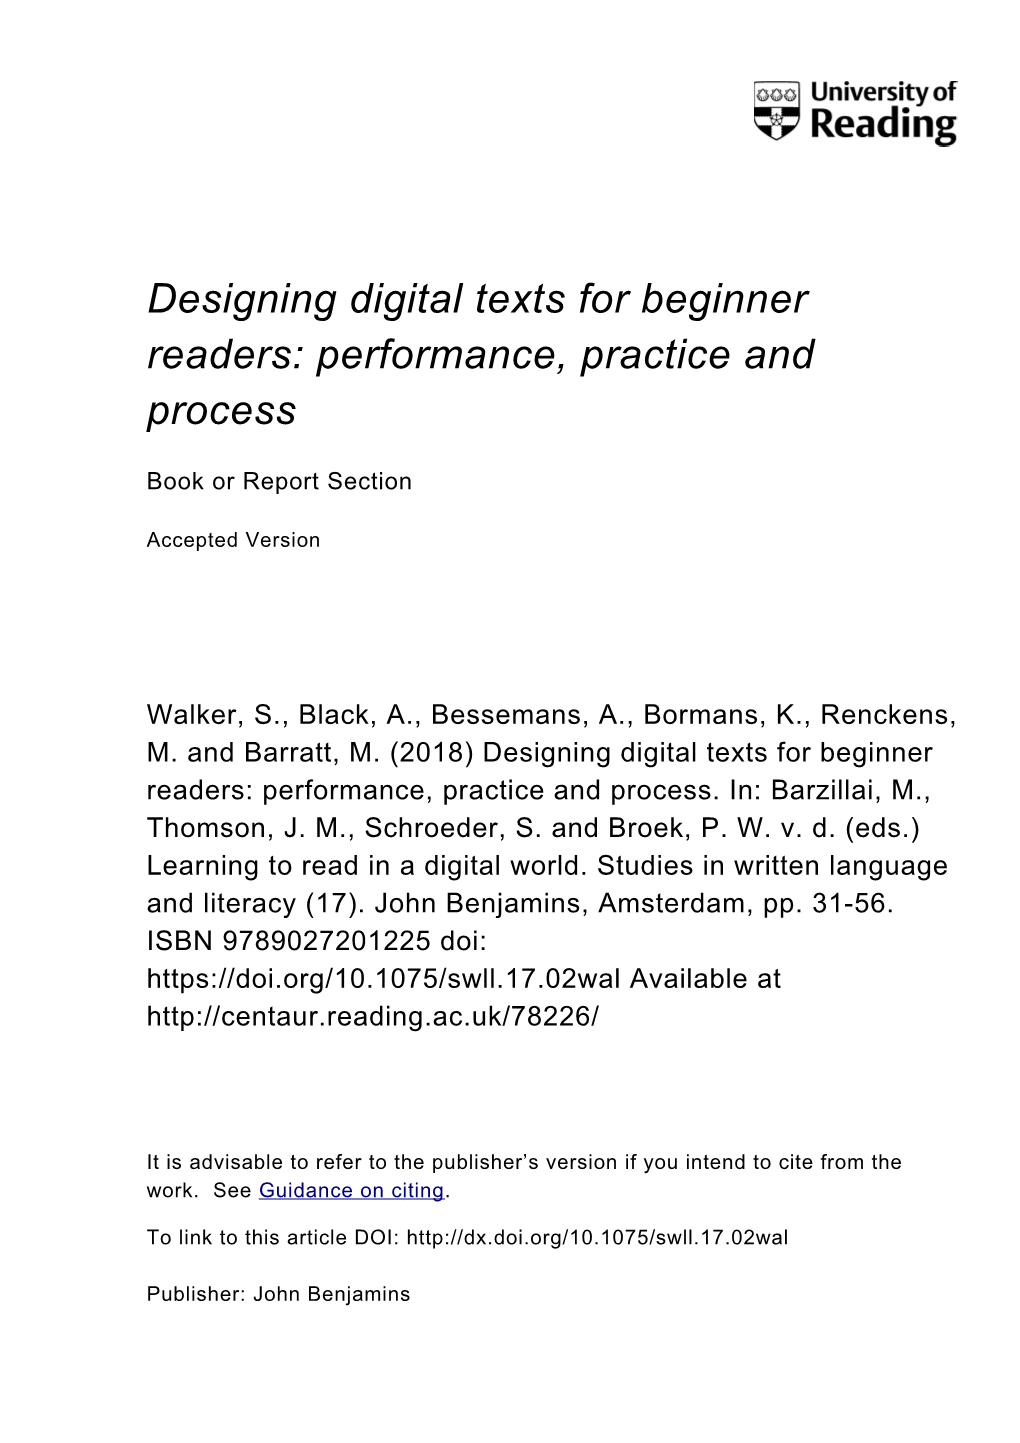 Designing Digital Texts for Beginner Readers: Performance, Practice and Process